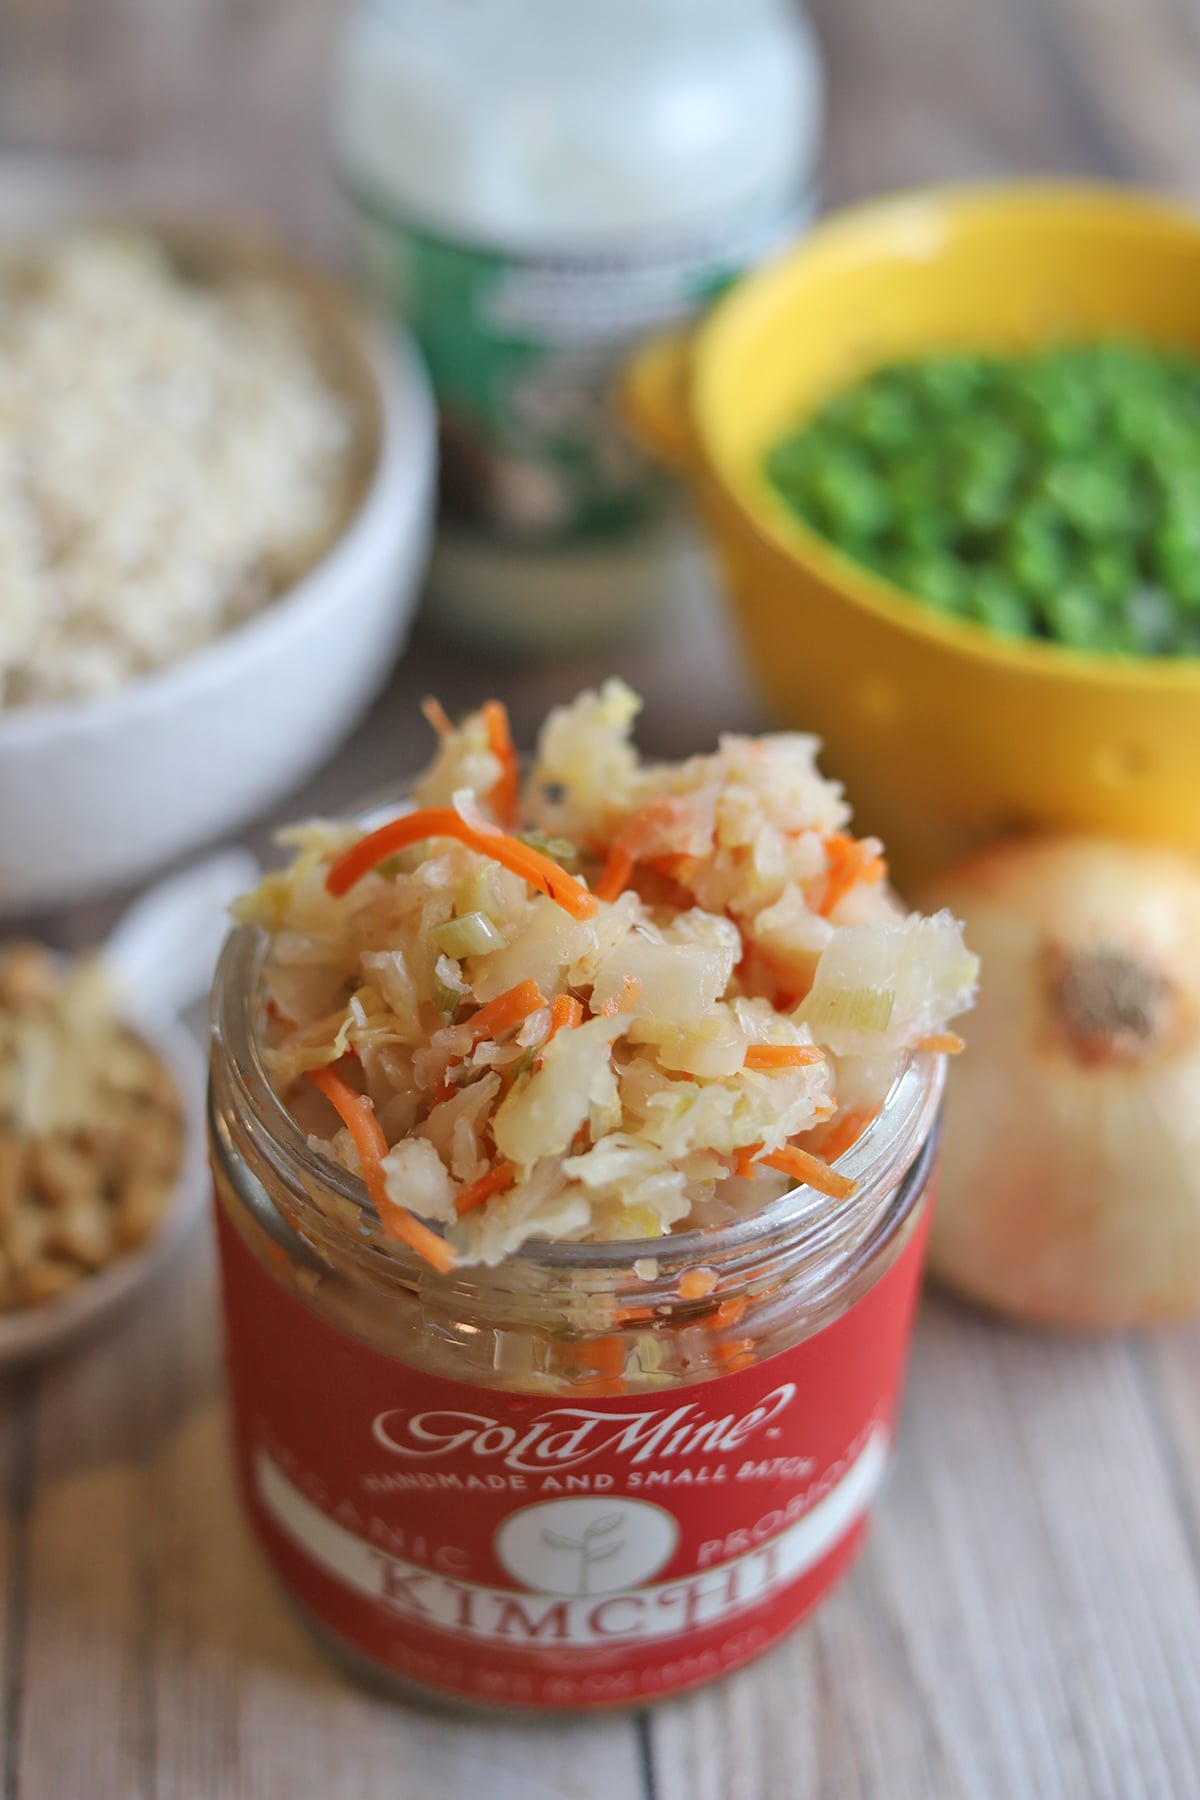 Jar of kimchi on table by peas, rice, and onion.